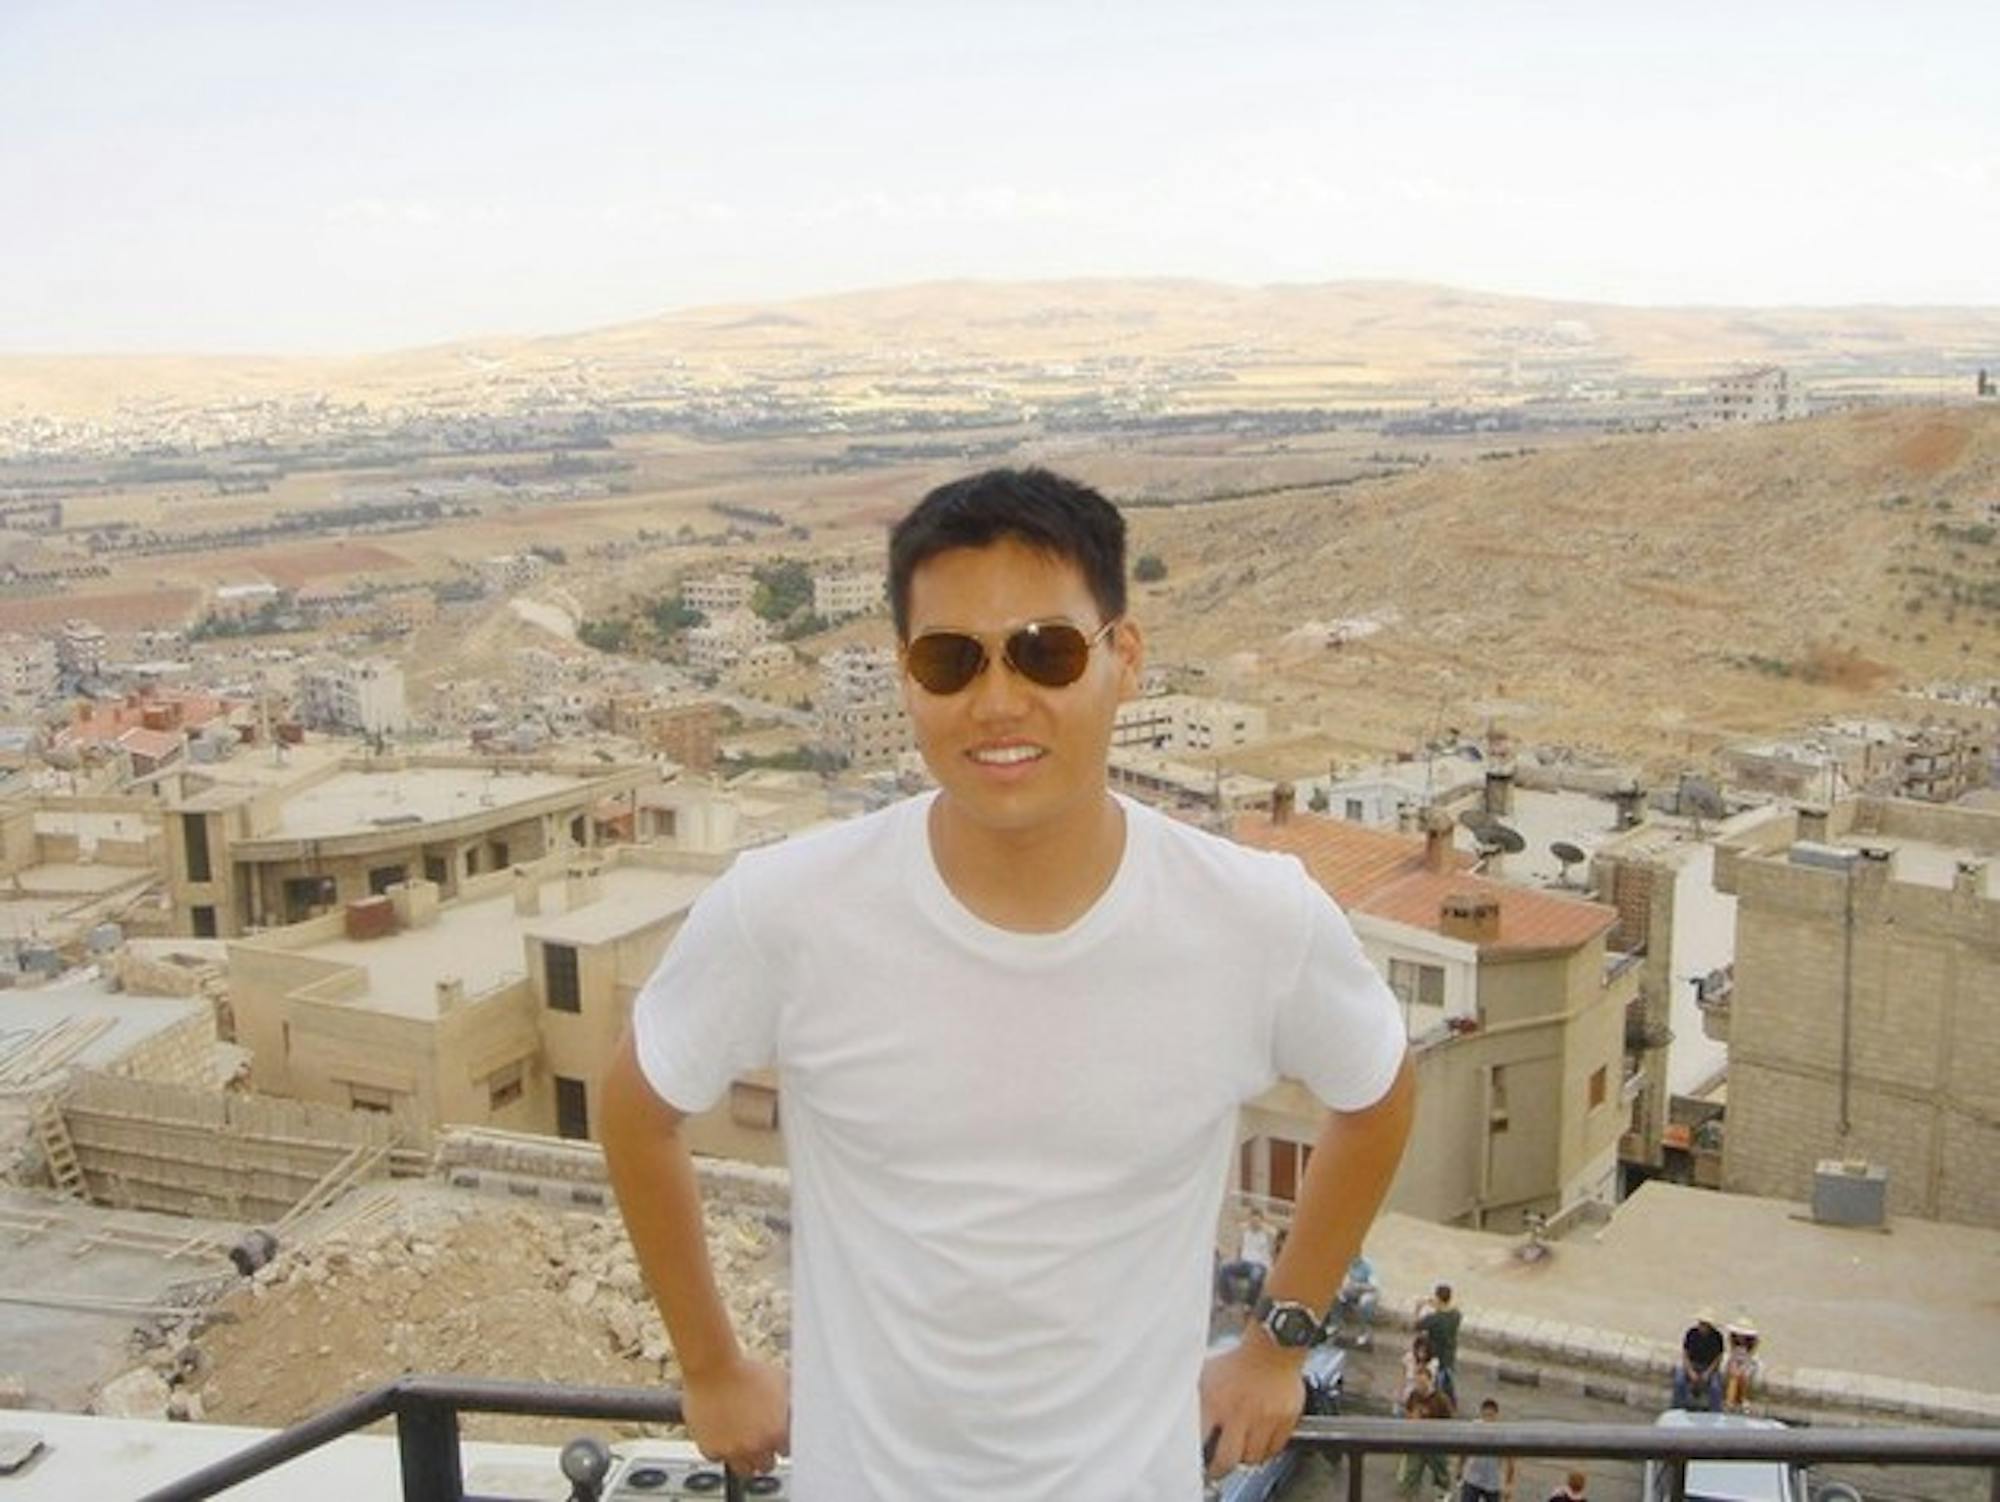 An Arabic language immersion program became all too real when Edward Kim '09 found himself in the middle of the Israeli-Lebanese conflict.